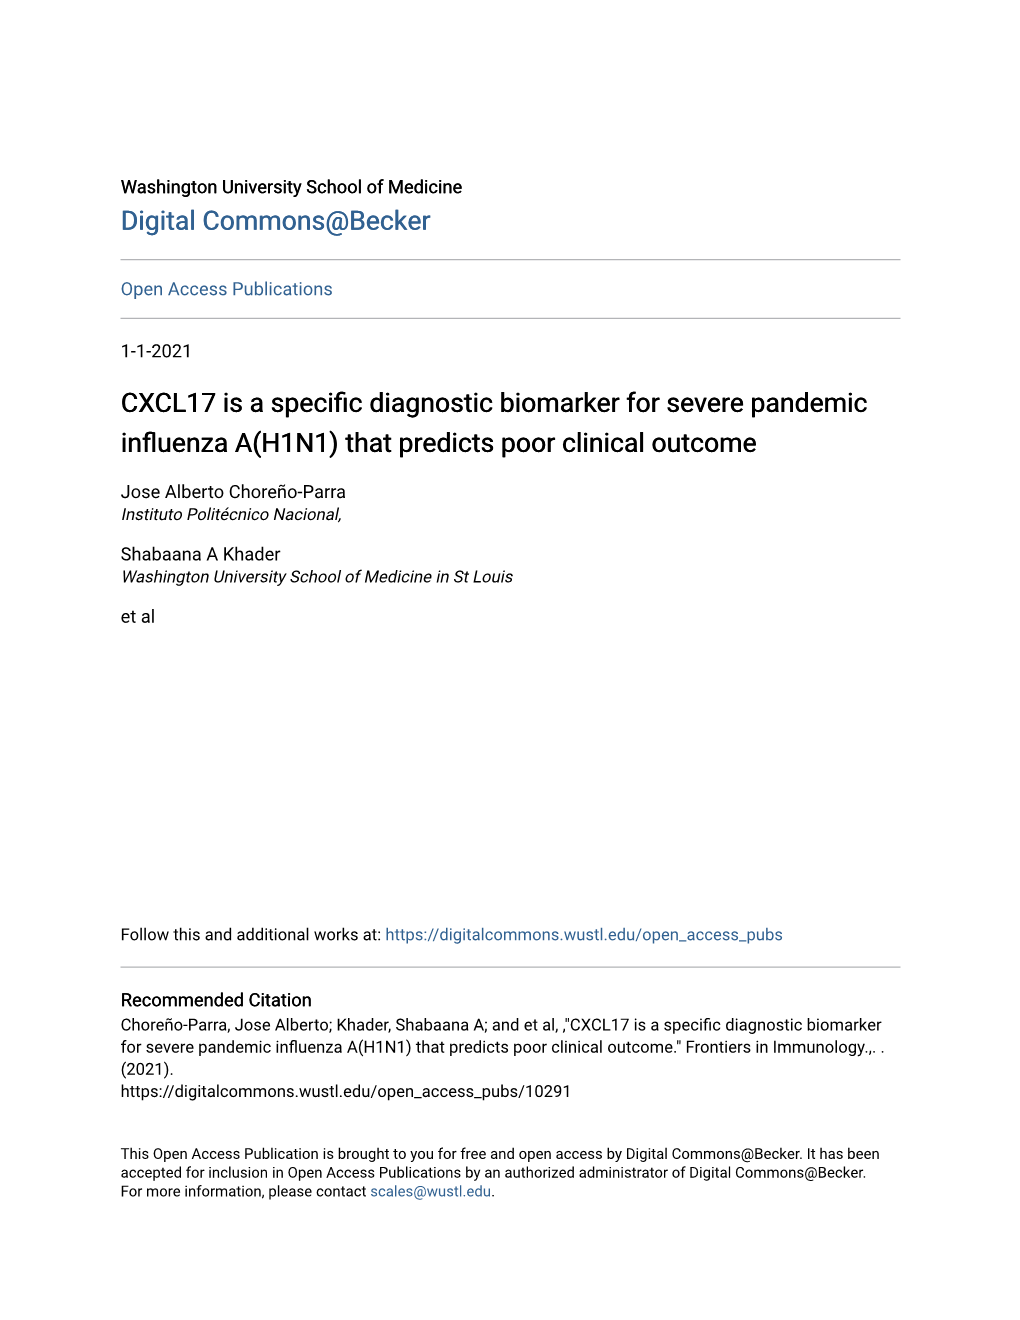 CXCL17 Is a Specific Diagnostic Biomarker for Severe Pandemic Influenza A(H1N1) That Predicts Poor Clinical Outcome